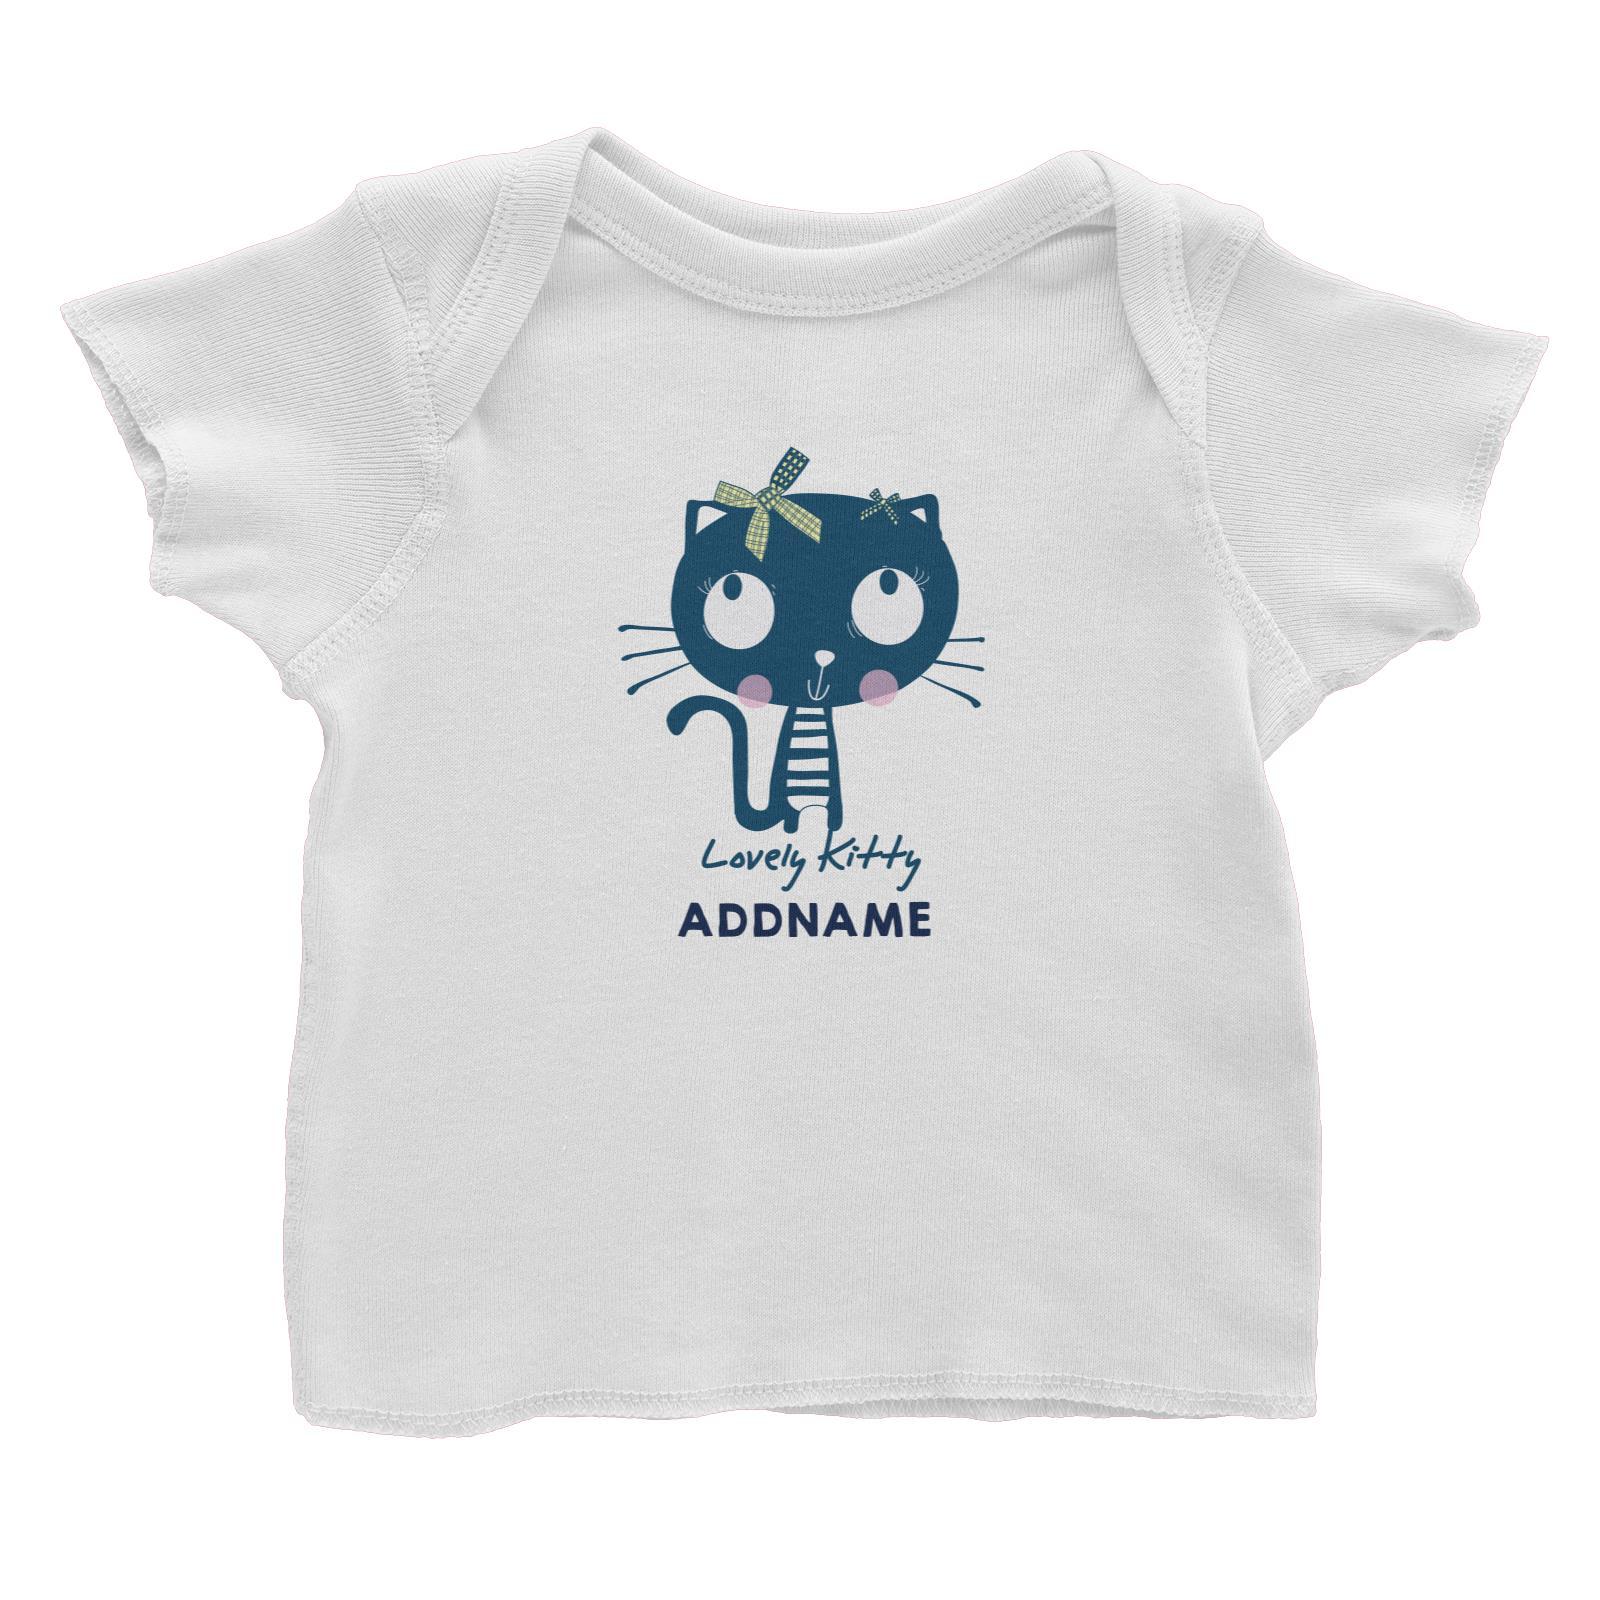 Cool Vibrant Series Lovely Blue Kitty Addname Baby T-Shirt